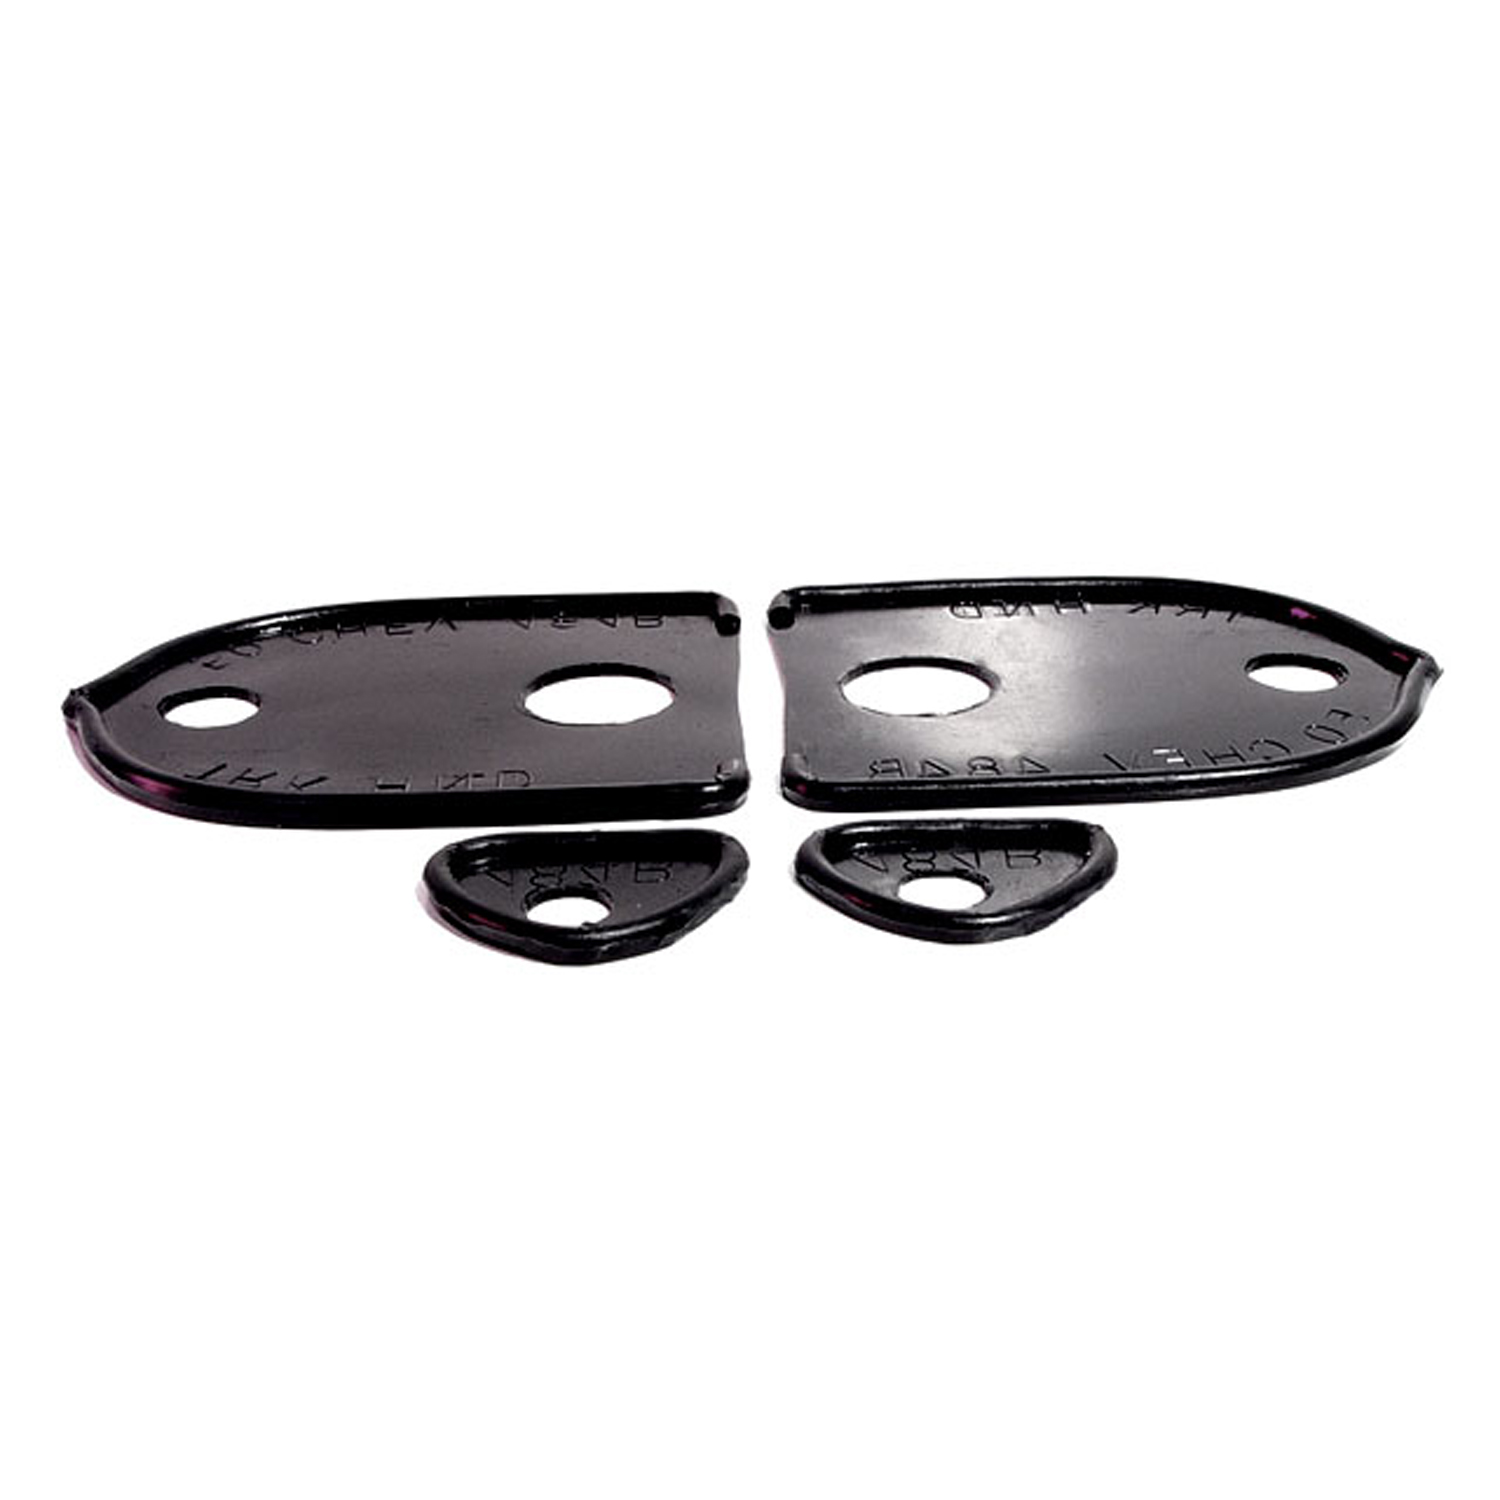 1950 Chevrolet Styleline Special Trunk Handle Pads.  3 long  1 long.  Set RL-MP 484-B